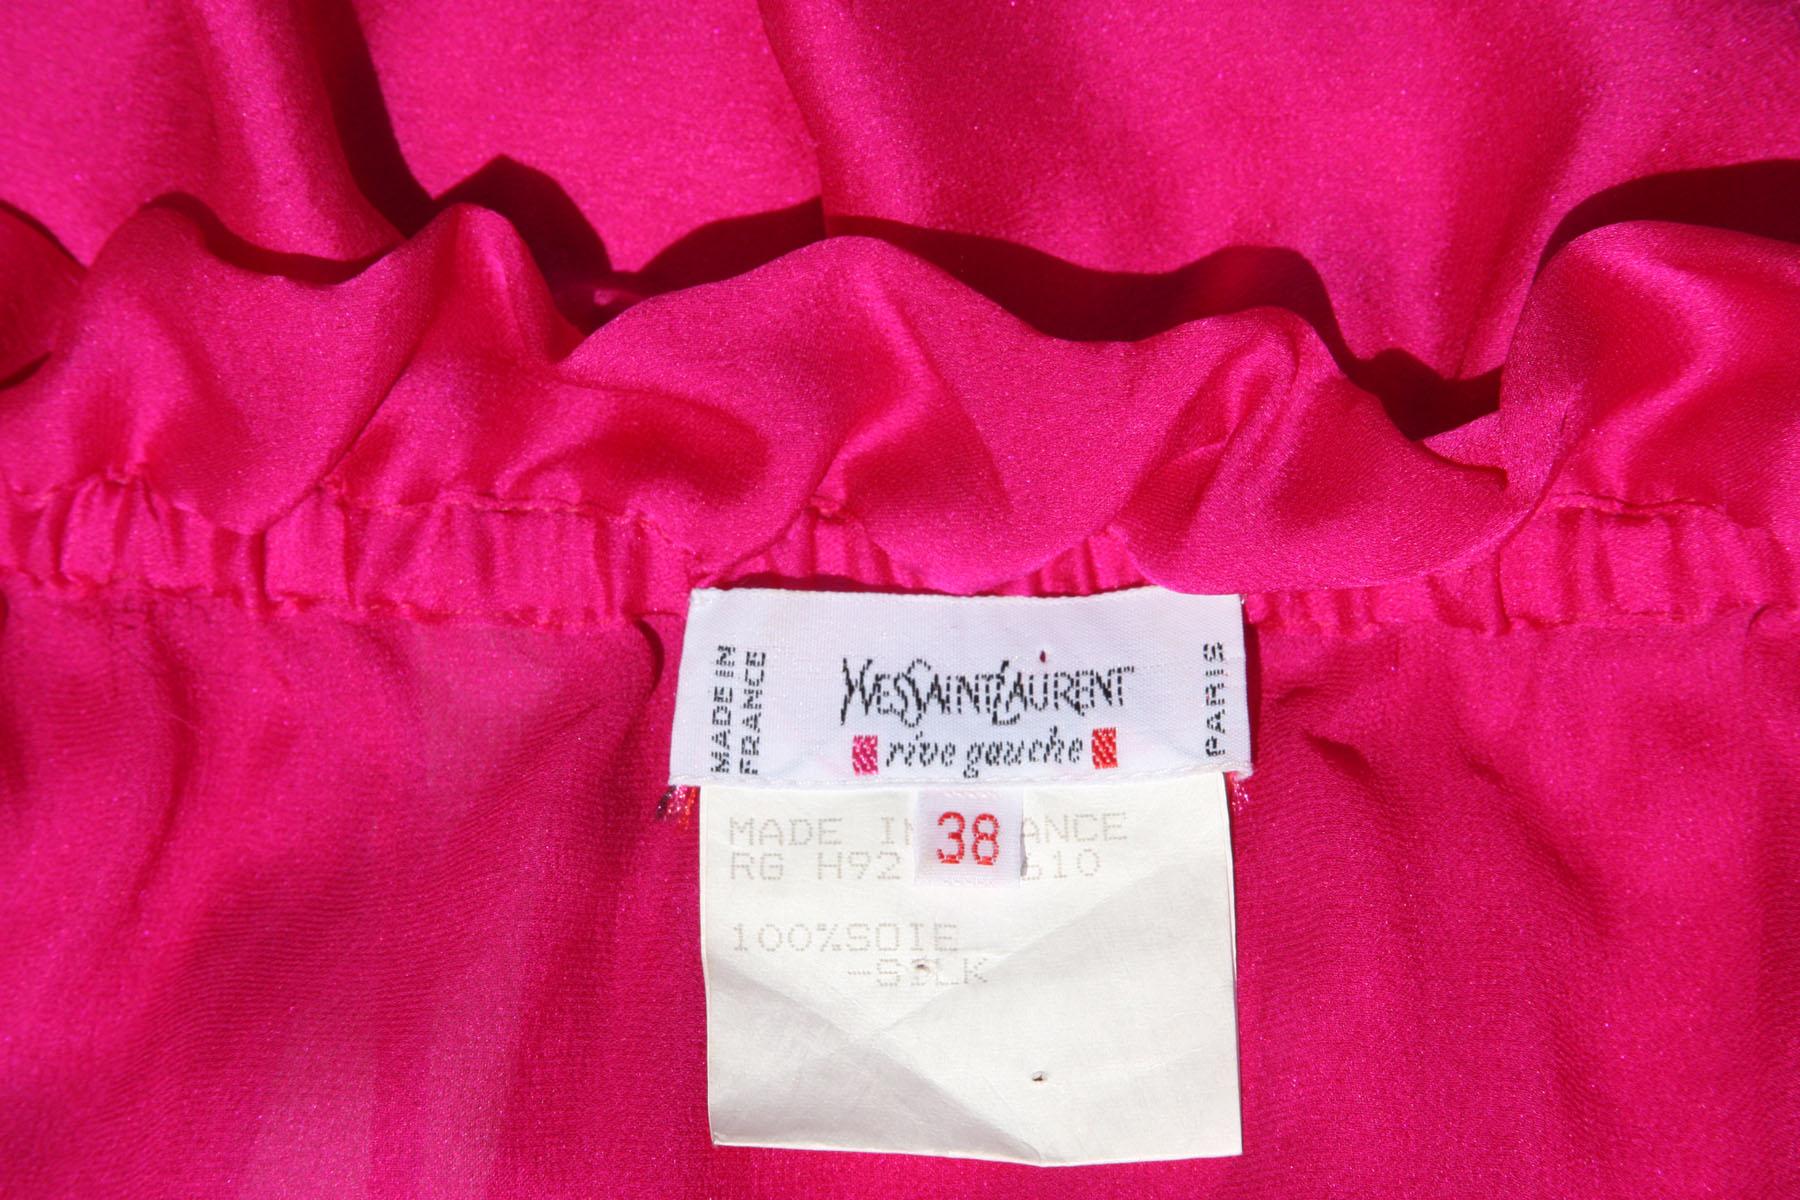 Yves Saint Laurent Rive Gauche Silk Off-Shoulder Bougainvillea Color Top Blouse  In Excellent Condition For Sale In Montgomery, TX